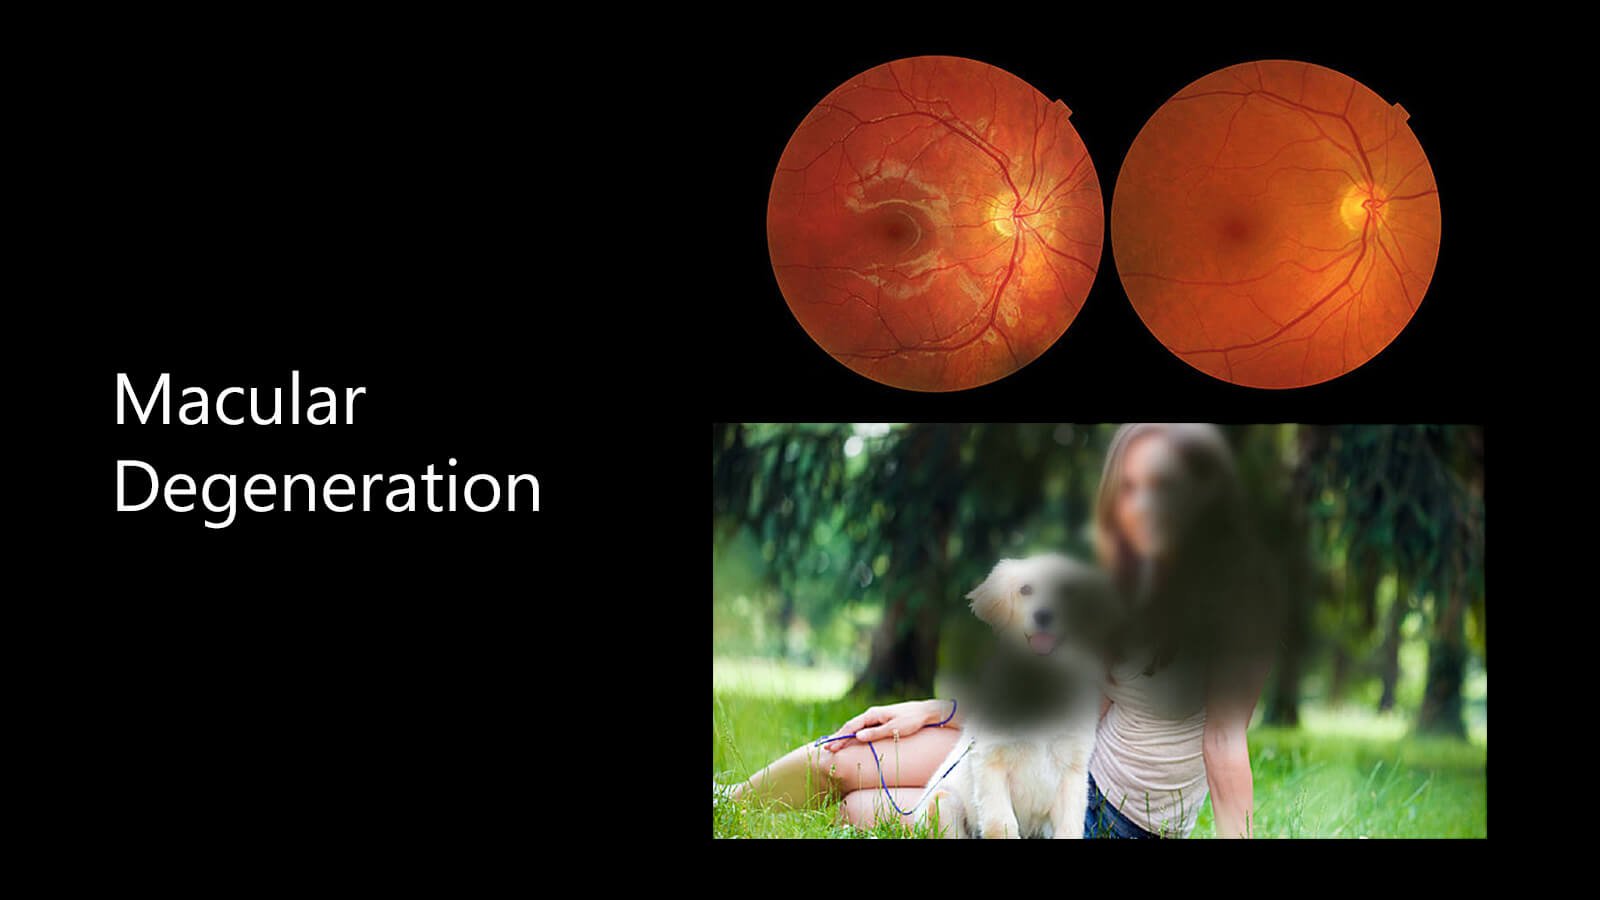 What is macular degeneration